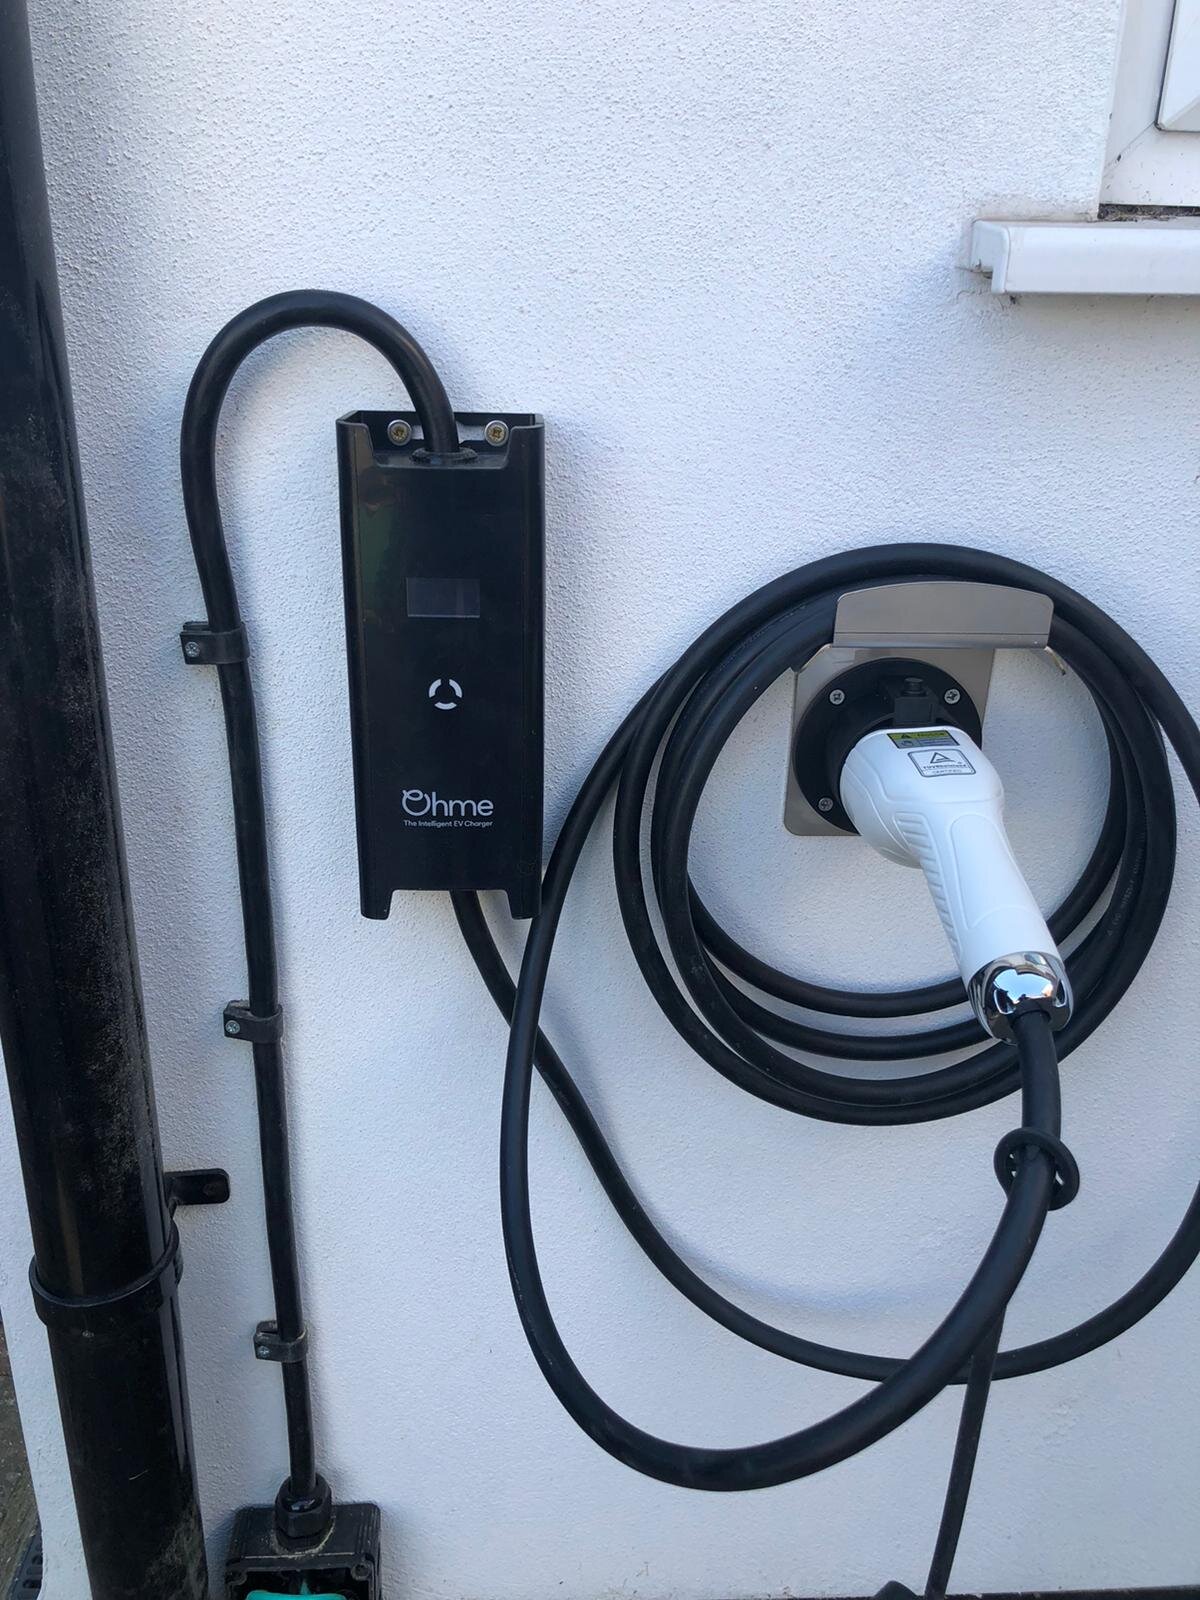 Ohme charger Elecology installation 7.jpeg